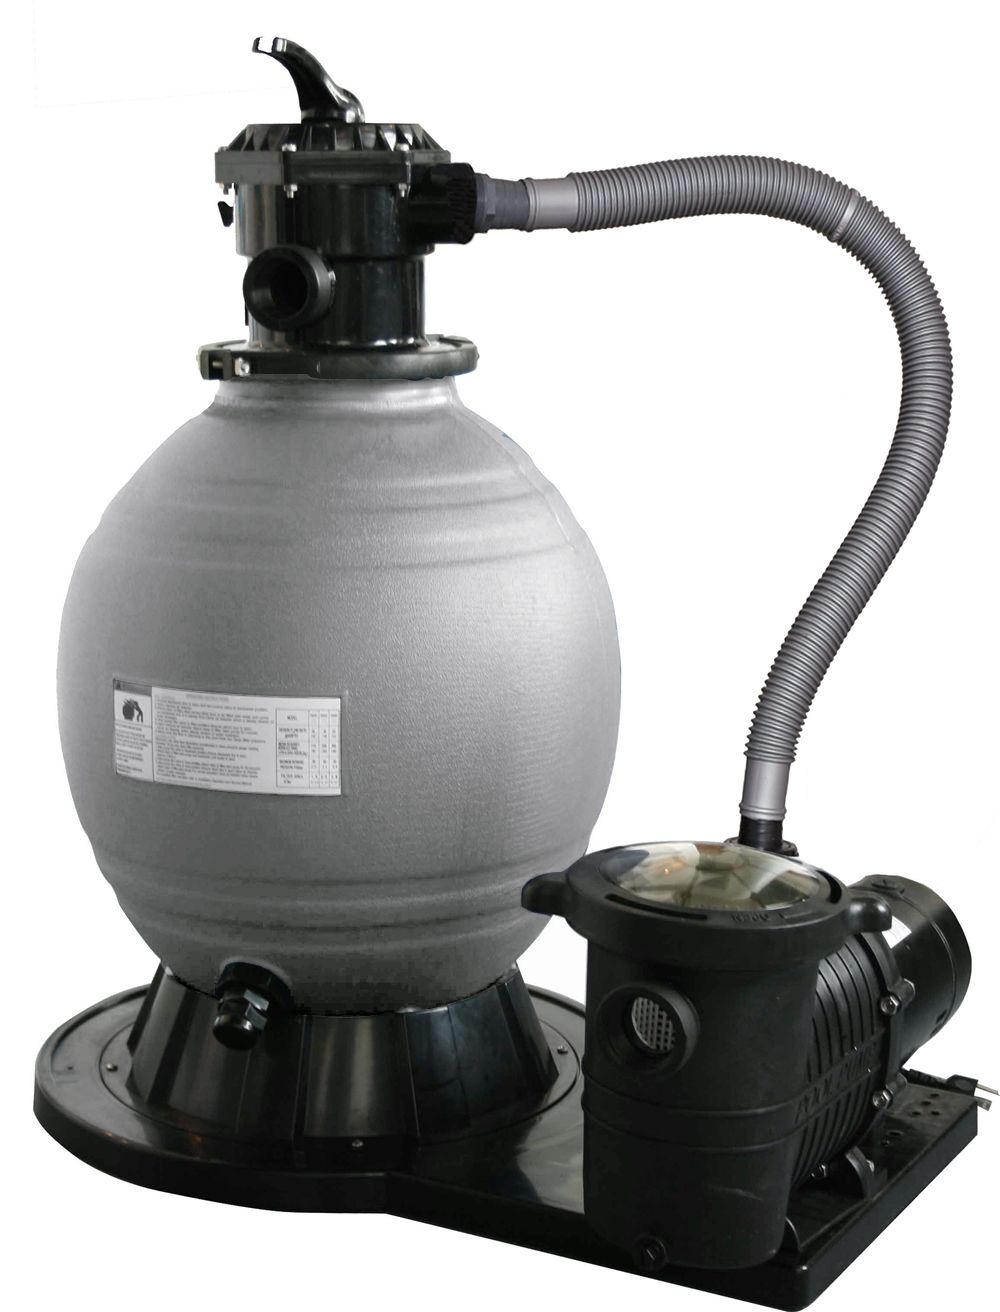 Blue Wave 18" Sand Filter System with 1 HP Pump for Above Ground Swimming Pools